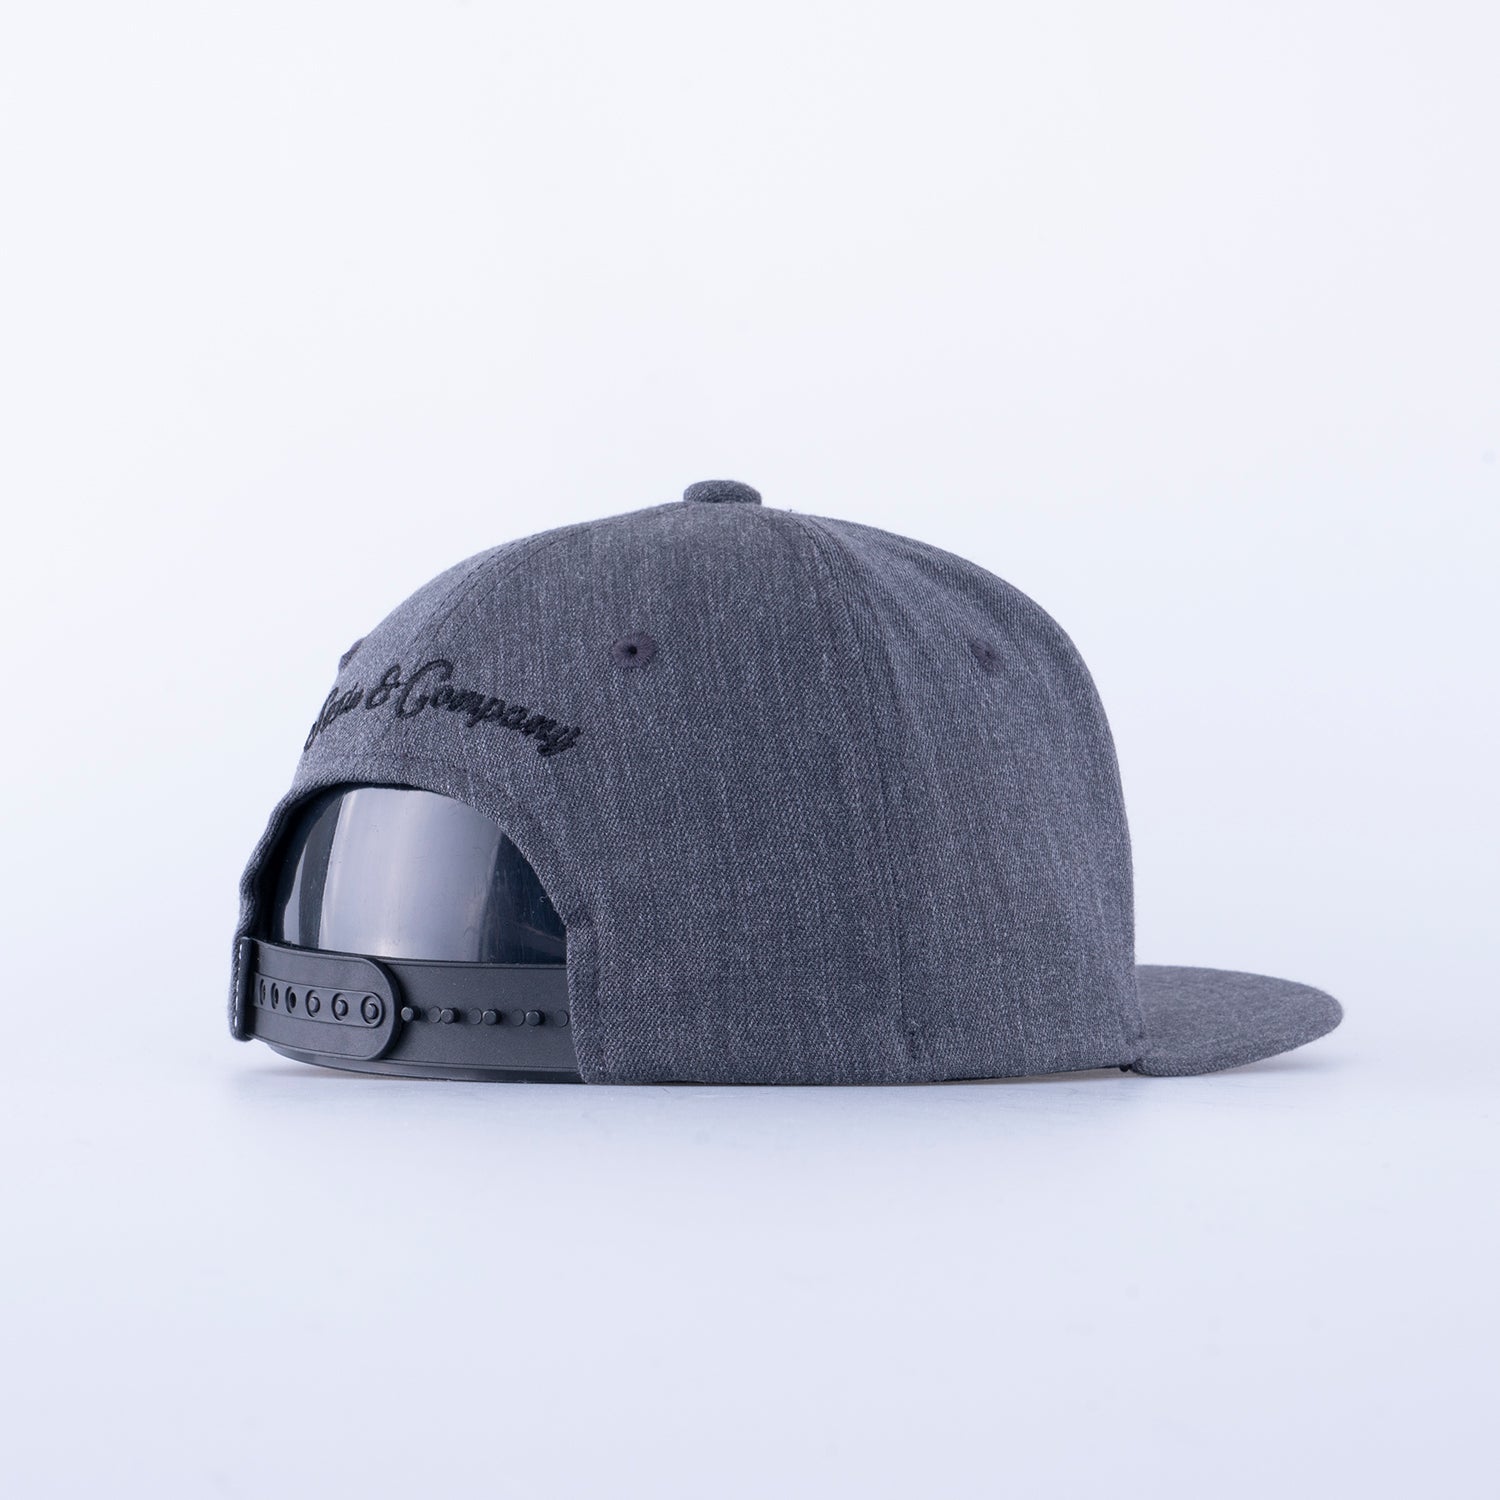 GREAT NORRLAND KIDS CAP - CHARCOAL